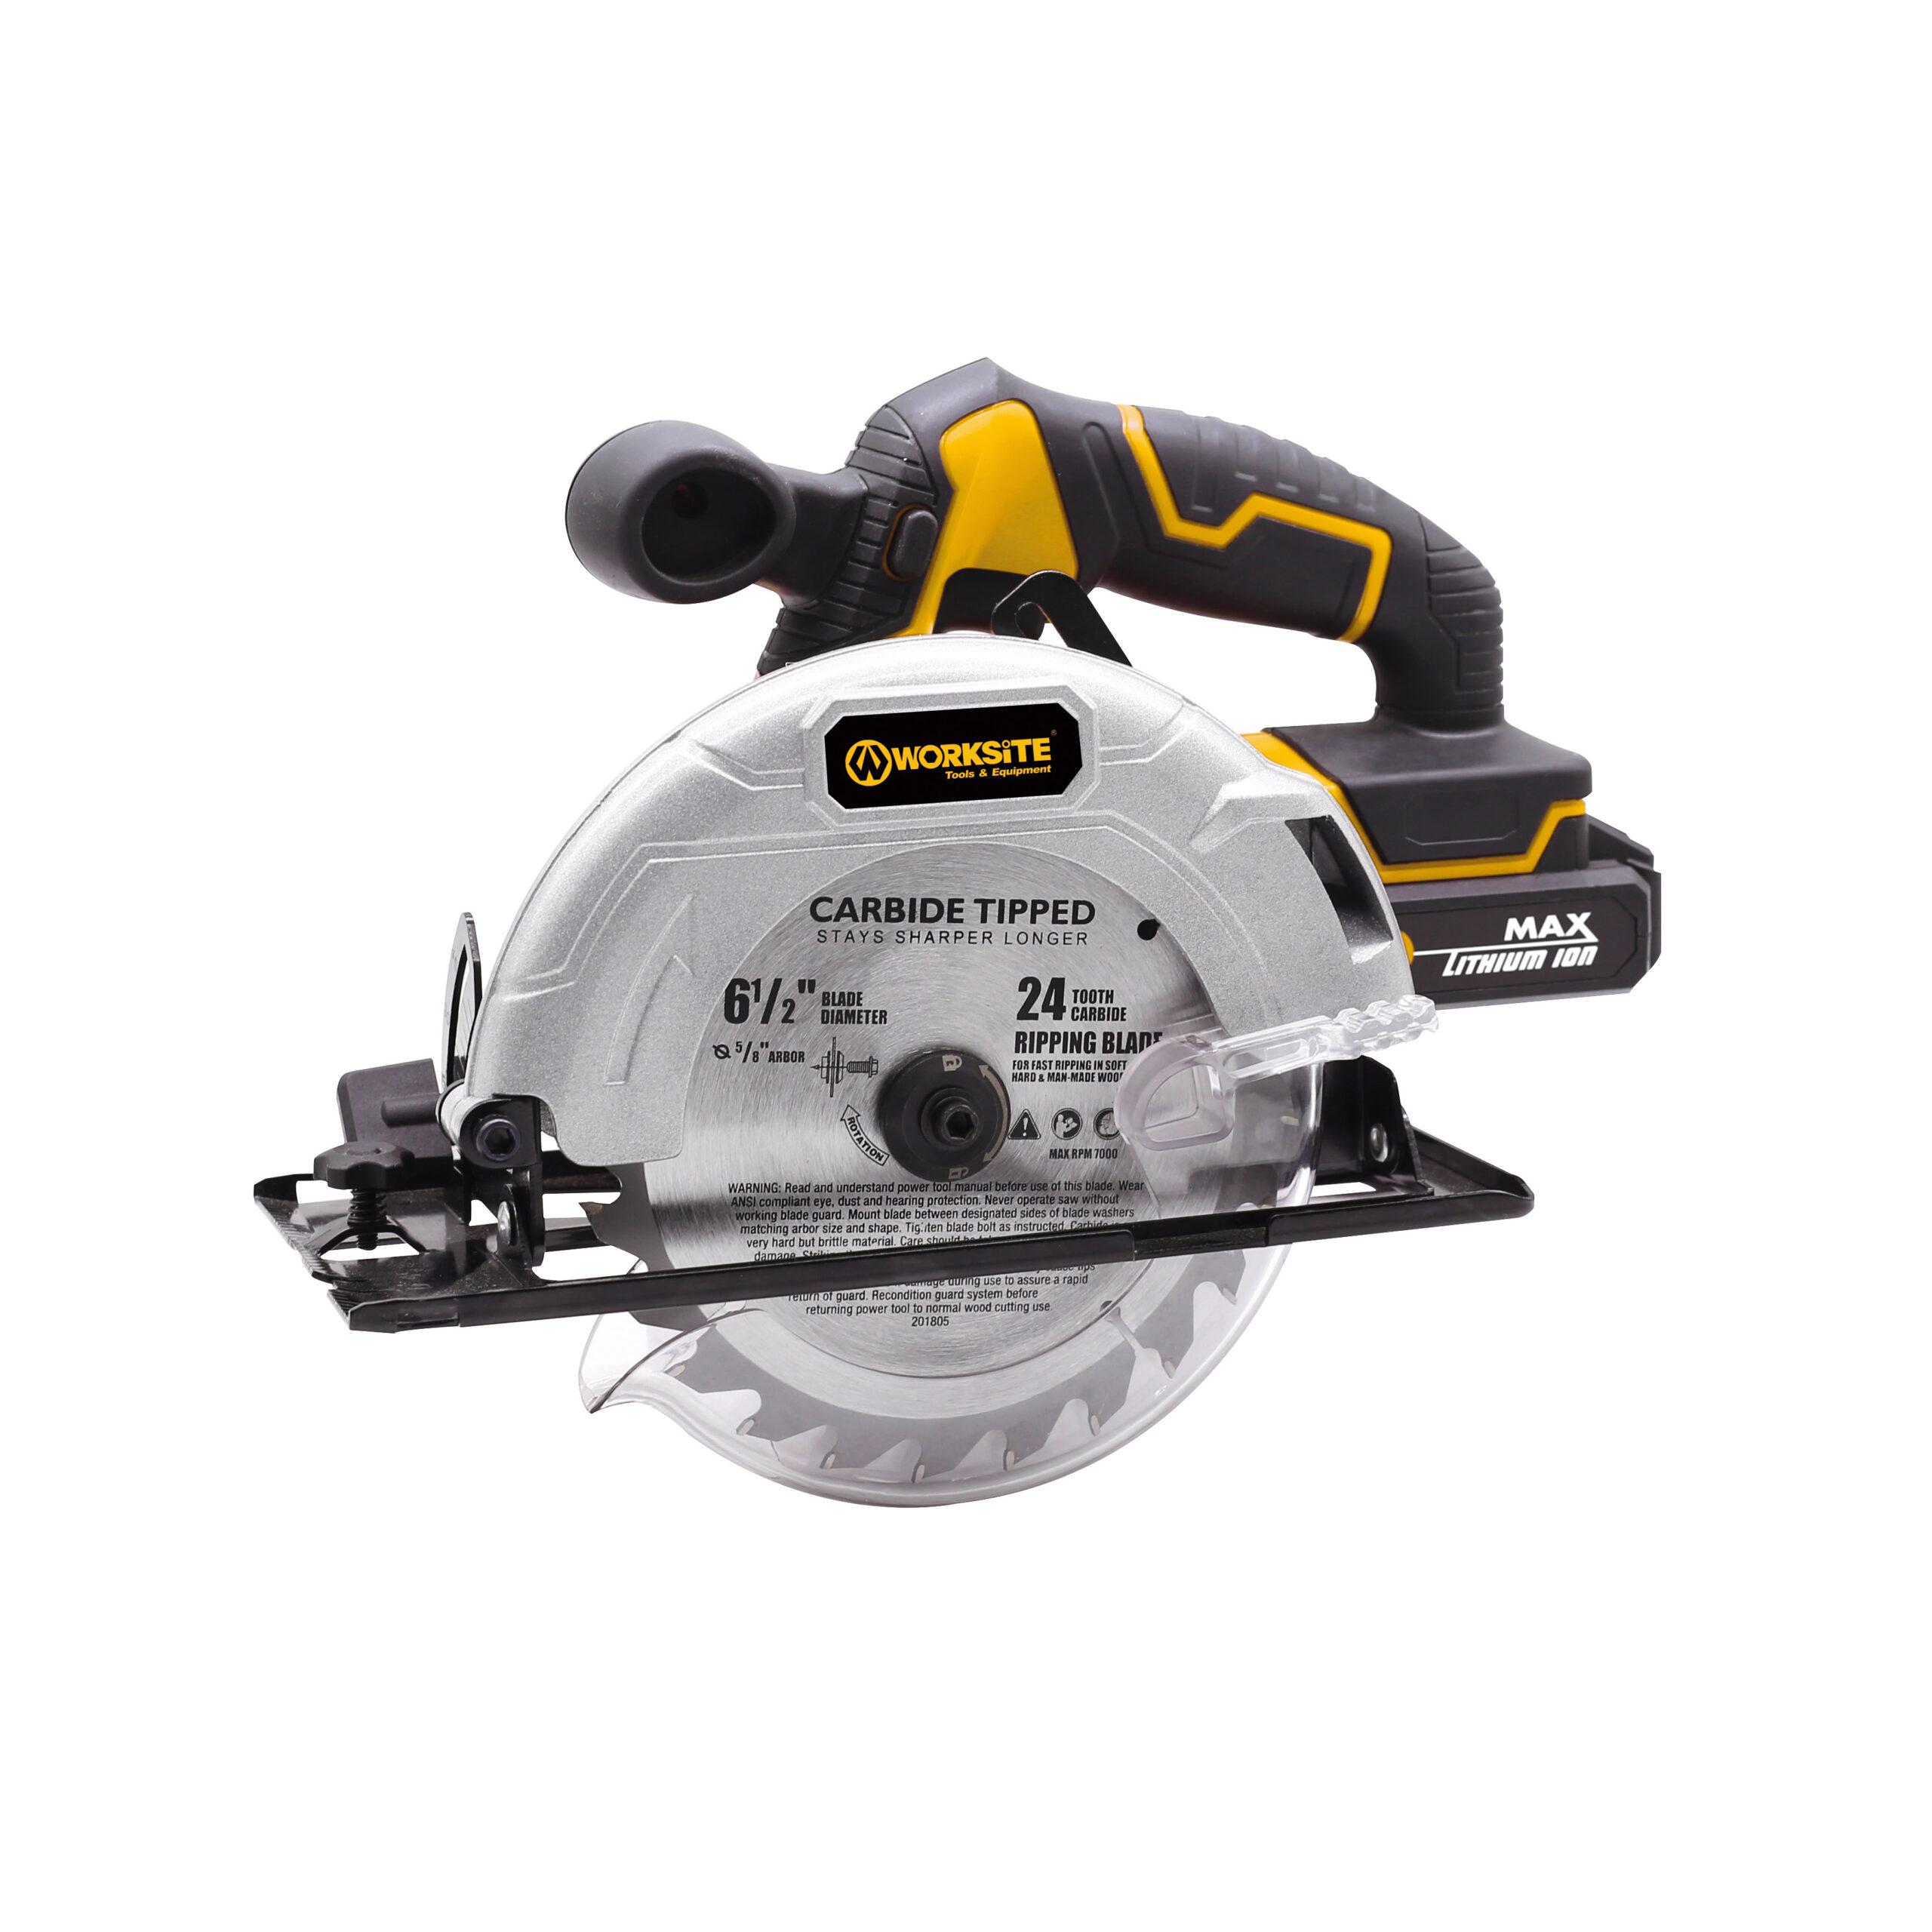 “Worksite Cordless Circular Saw 20V, 2.0AH Battery and FAST Charger. High-Performance Motor delivers 4000 RPM’s for aggressive cutting. 6-1/2″” Carbide Tooth Blade delivers a 2-1/8′ cutting capacity.  Its lightweight design reduces jobsite fatigue, Comfortable rubberized Handle grip. CCS334